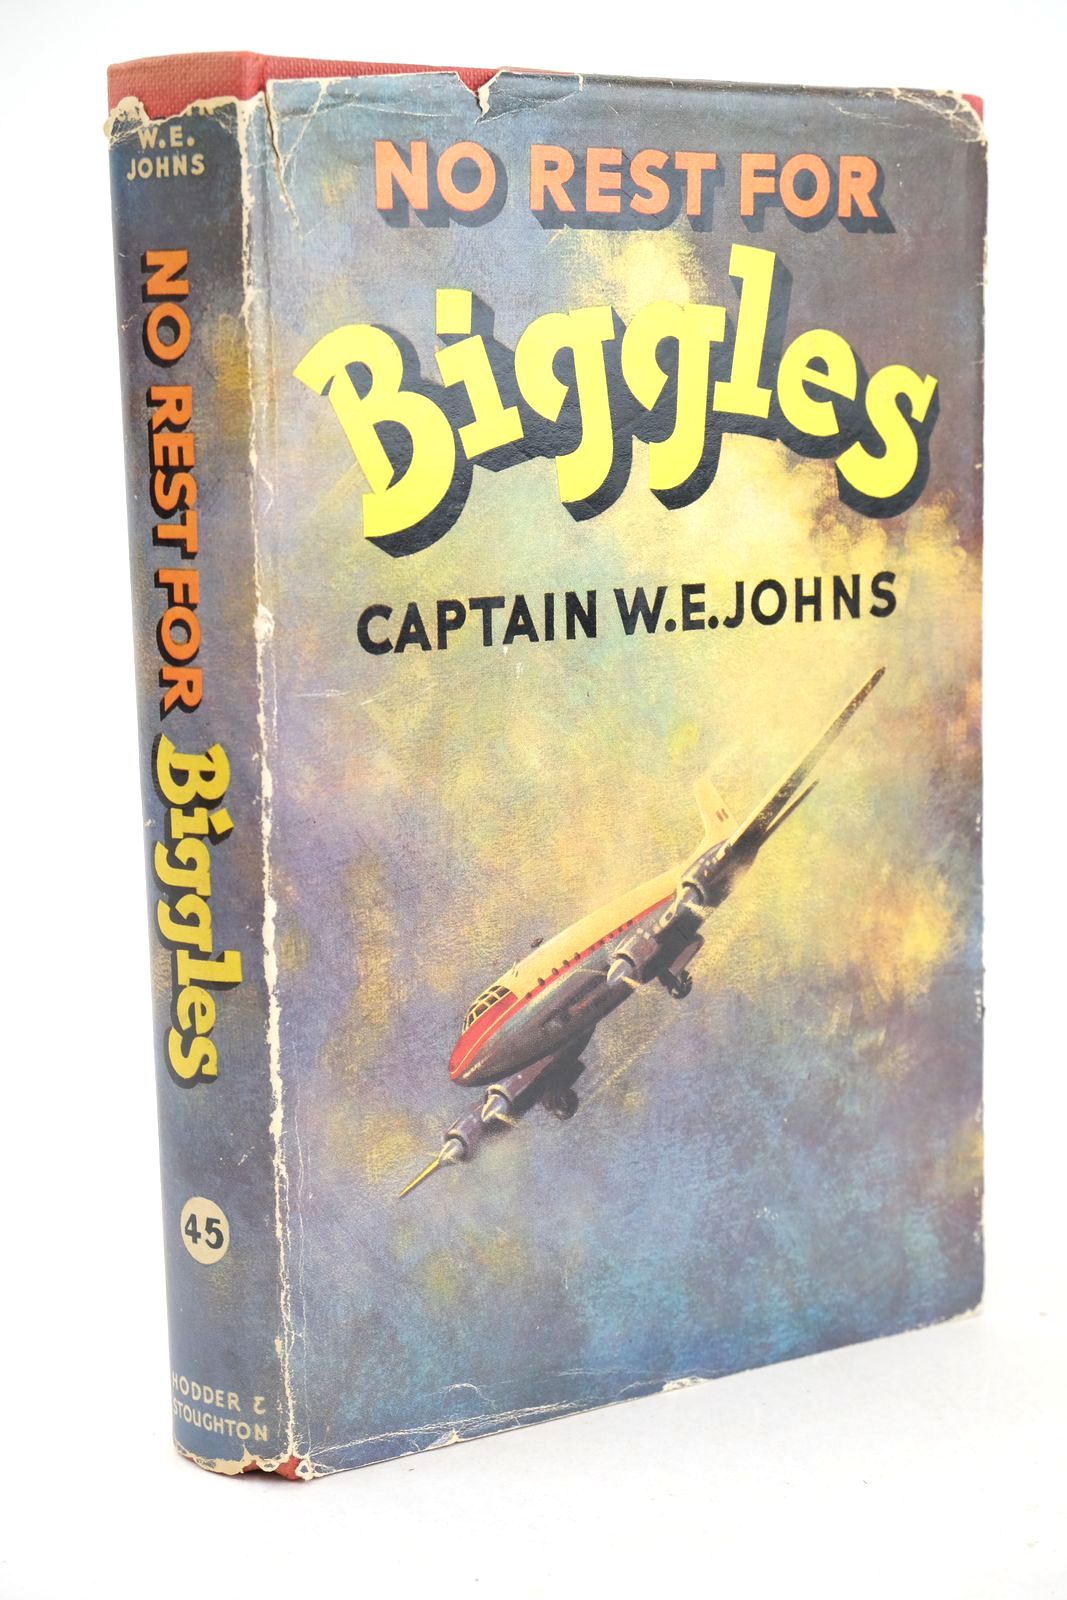 Photo of NO REST FOR BIGGLES written by Johns, W.E. illustrated by Stead,  published by Hodder & Stoughton (STOCK CODE: 1325770)  for sale by Stella & Rose's Books